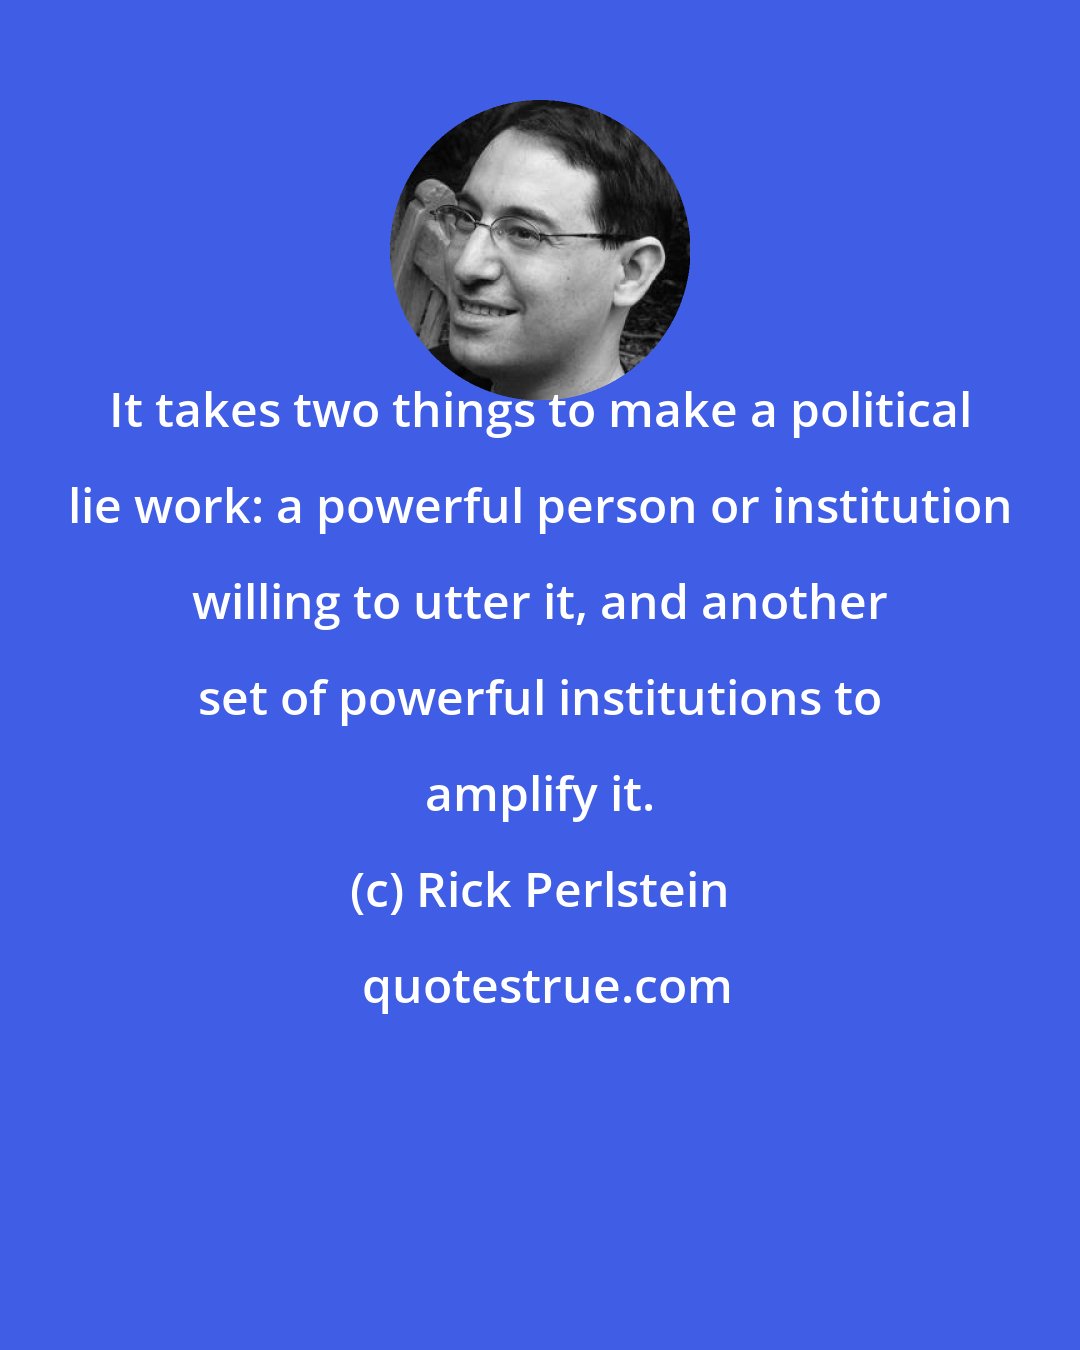 Rick Perlstein: It takes two things to make a political lie work: a powerful person or institution willing to utter it, and another set of powerful institutions to amplify it.